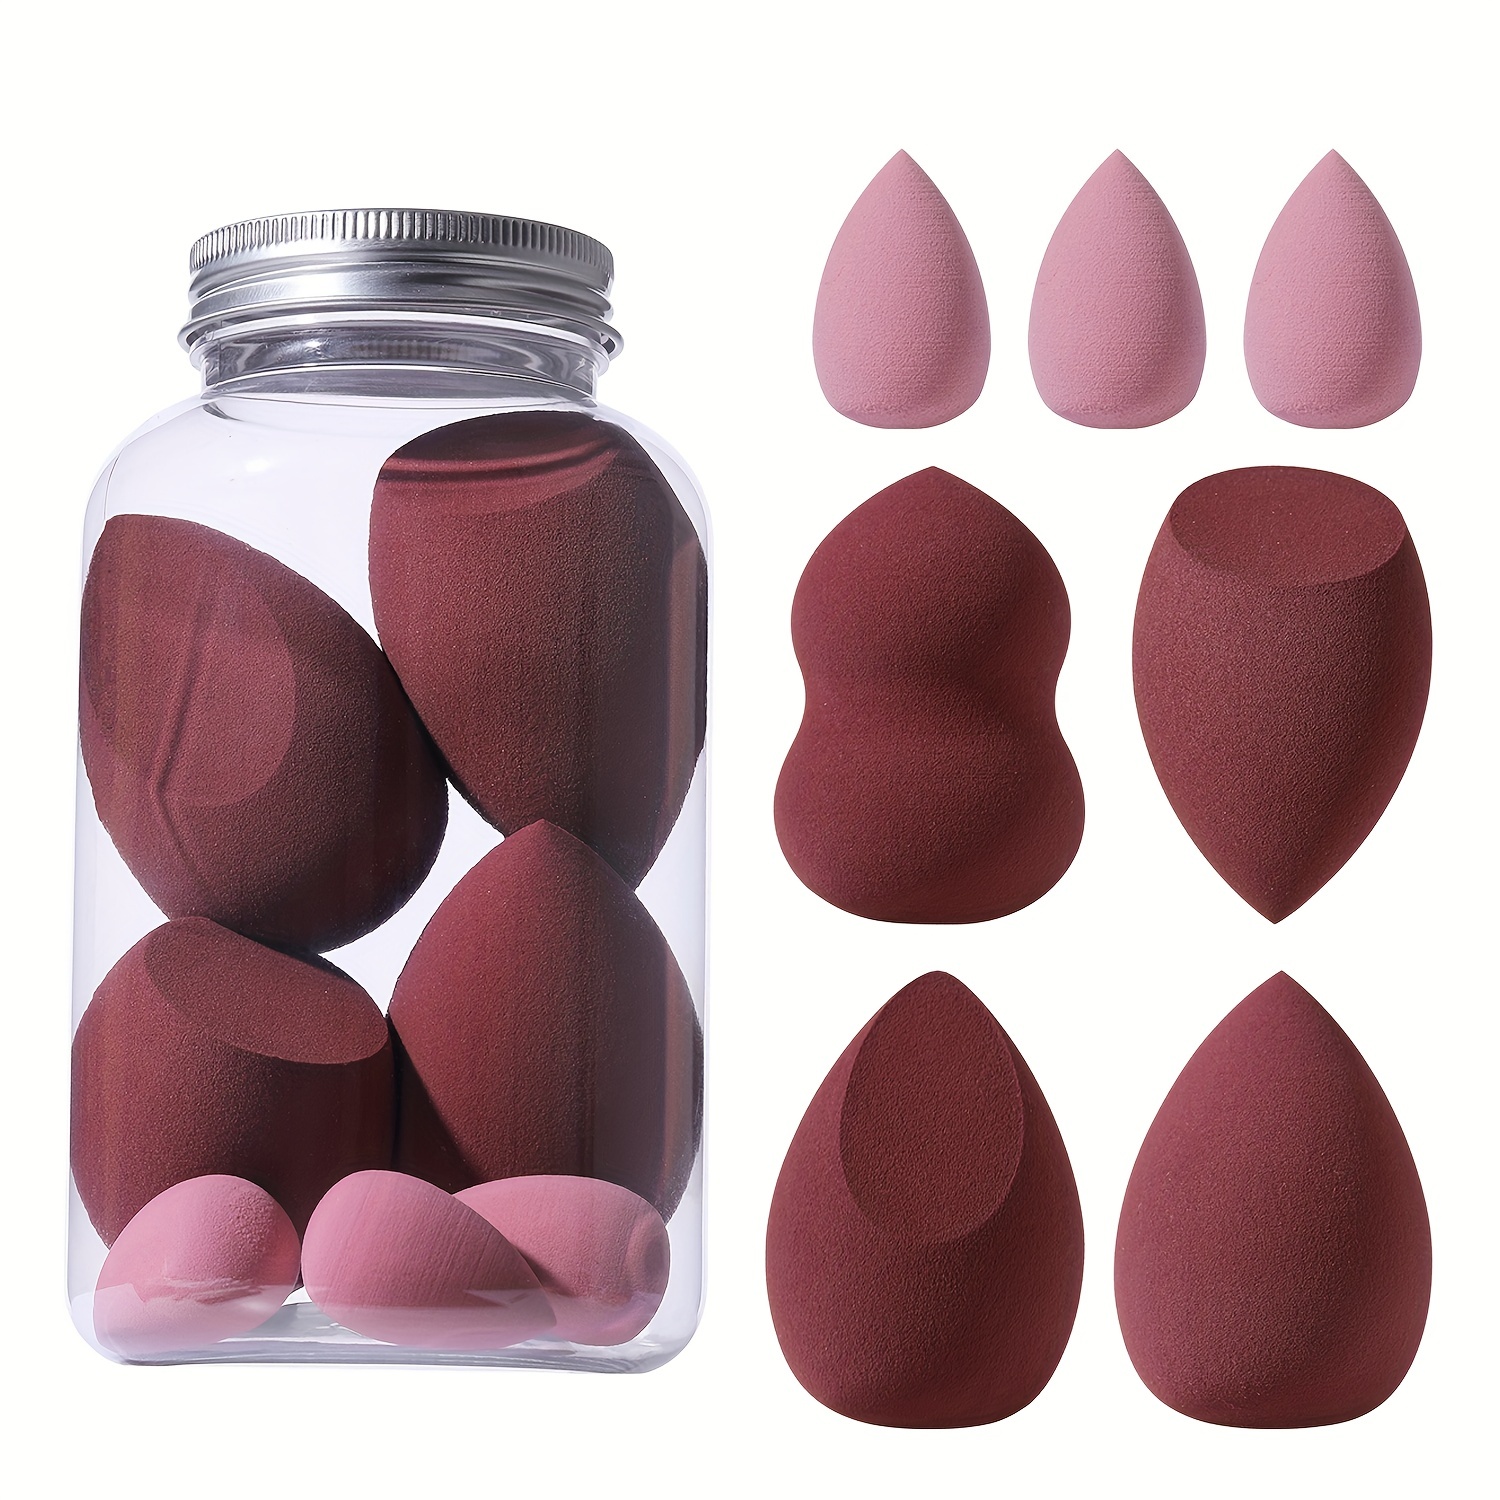 

7pcs Colorful Makeup Sponge Set With Storage Bucket - Soft Wet And Dry Dual Use Powder Puff For Face Makeup - Perfect For Beginners, Beauty Blender